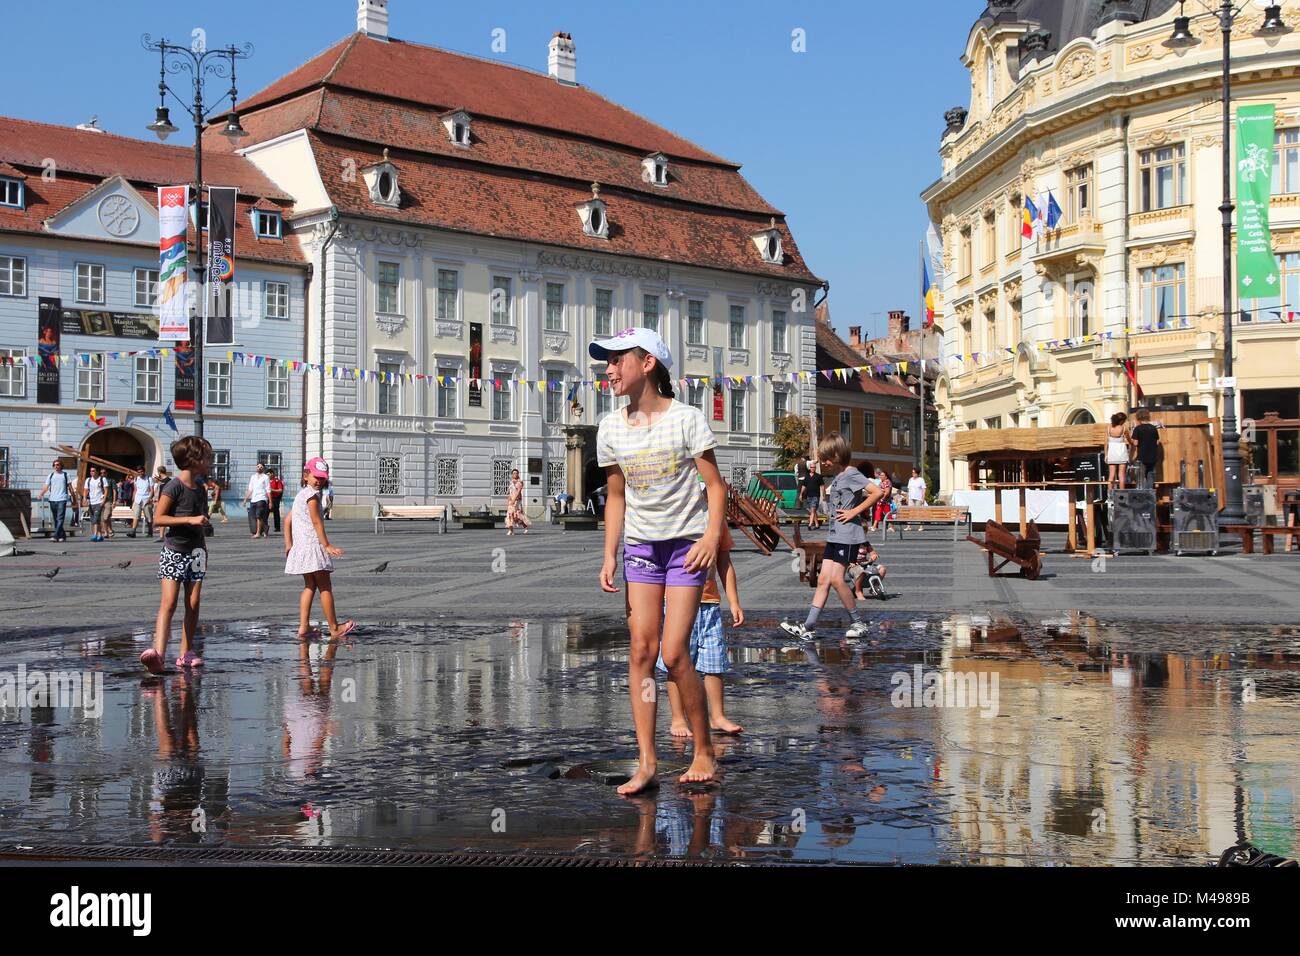 SIBIU, ROMANIA - AUGUST 24: People visit main square on August 24, 2012 in Sibiu, Romania. Sibiu's tourism is growing with 284,513 museum visitors in  Stock Photo